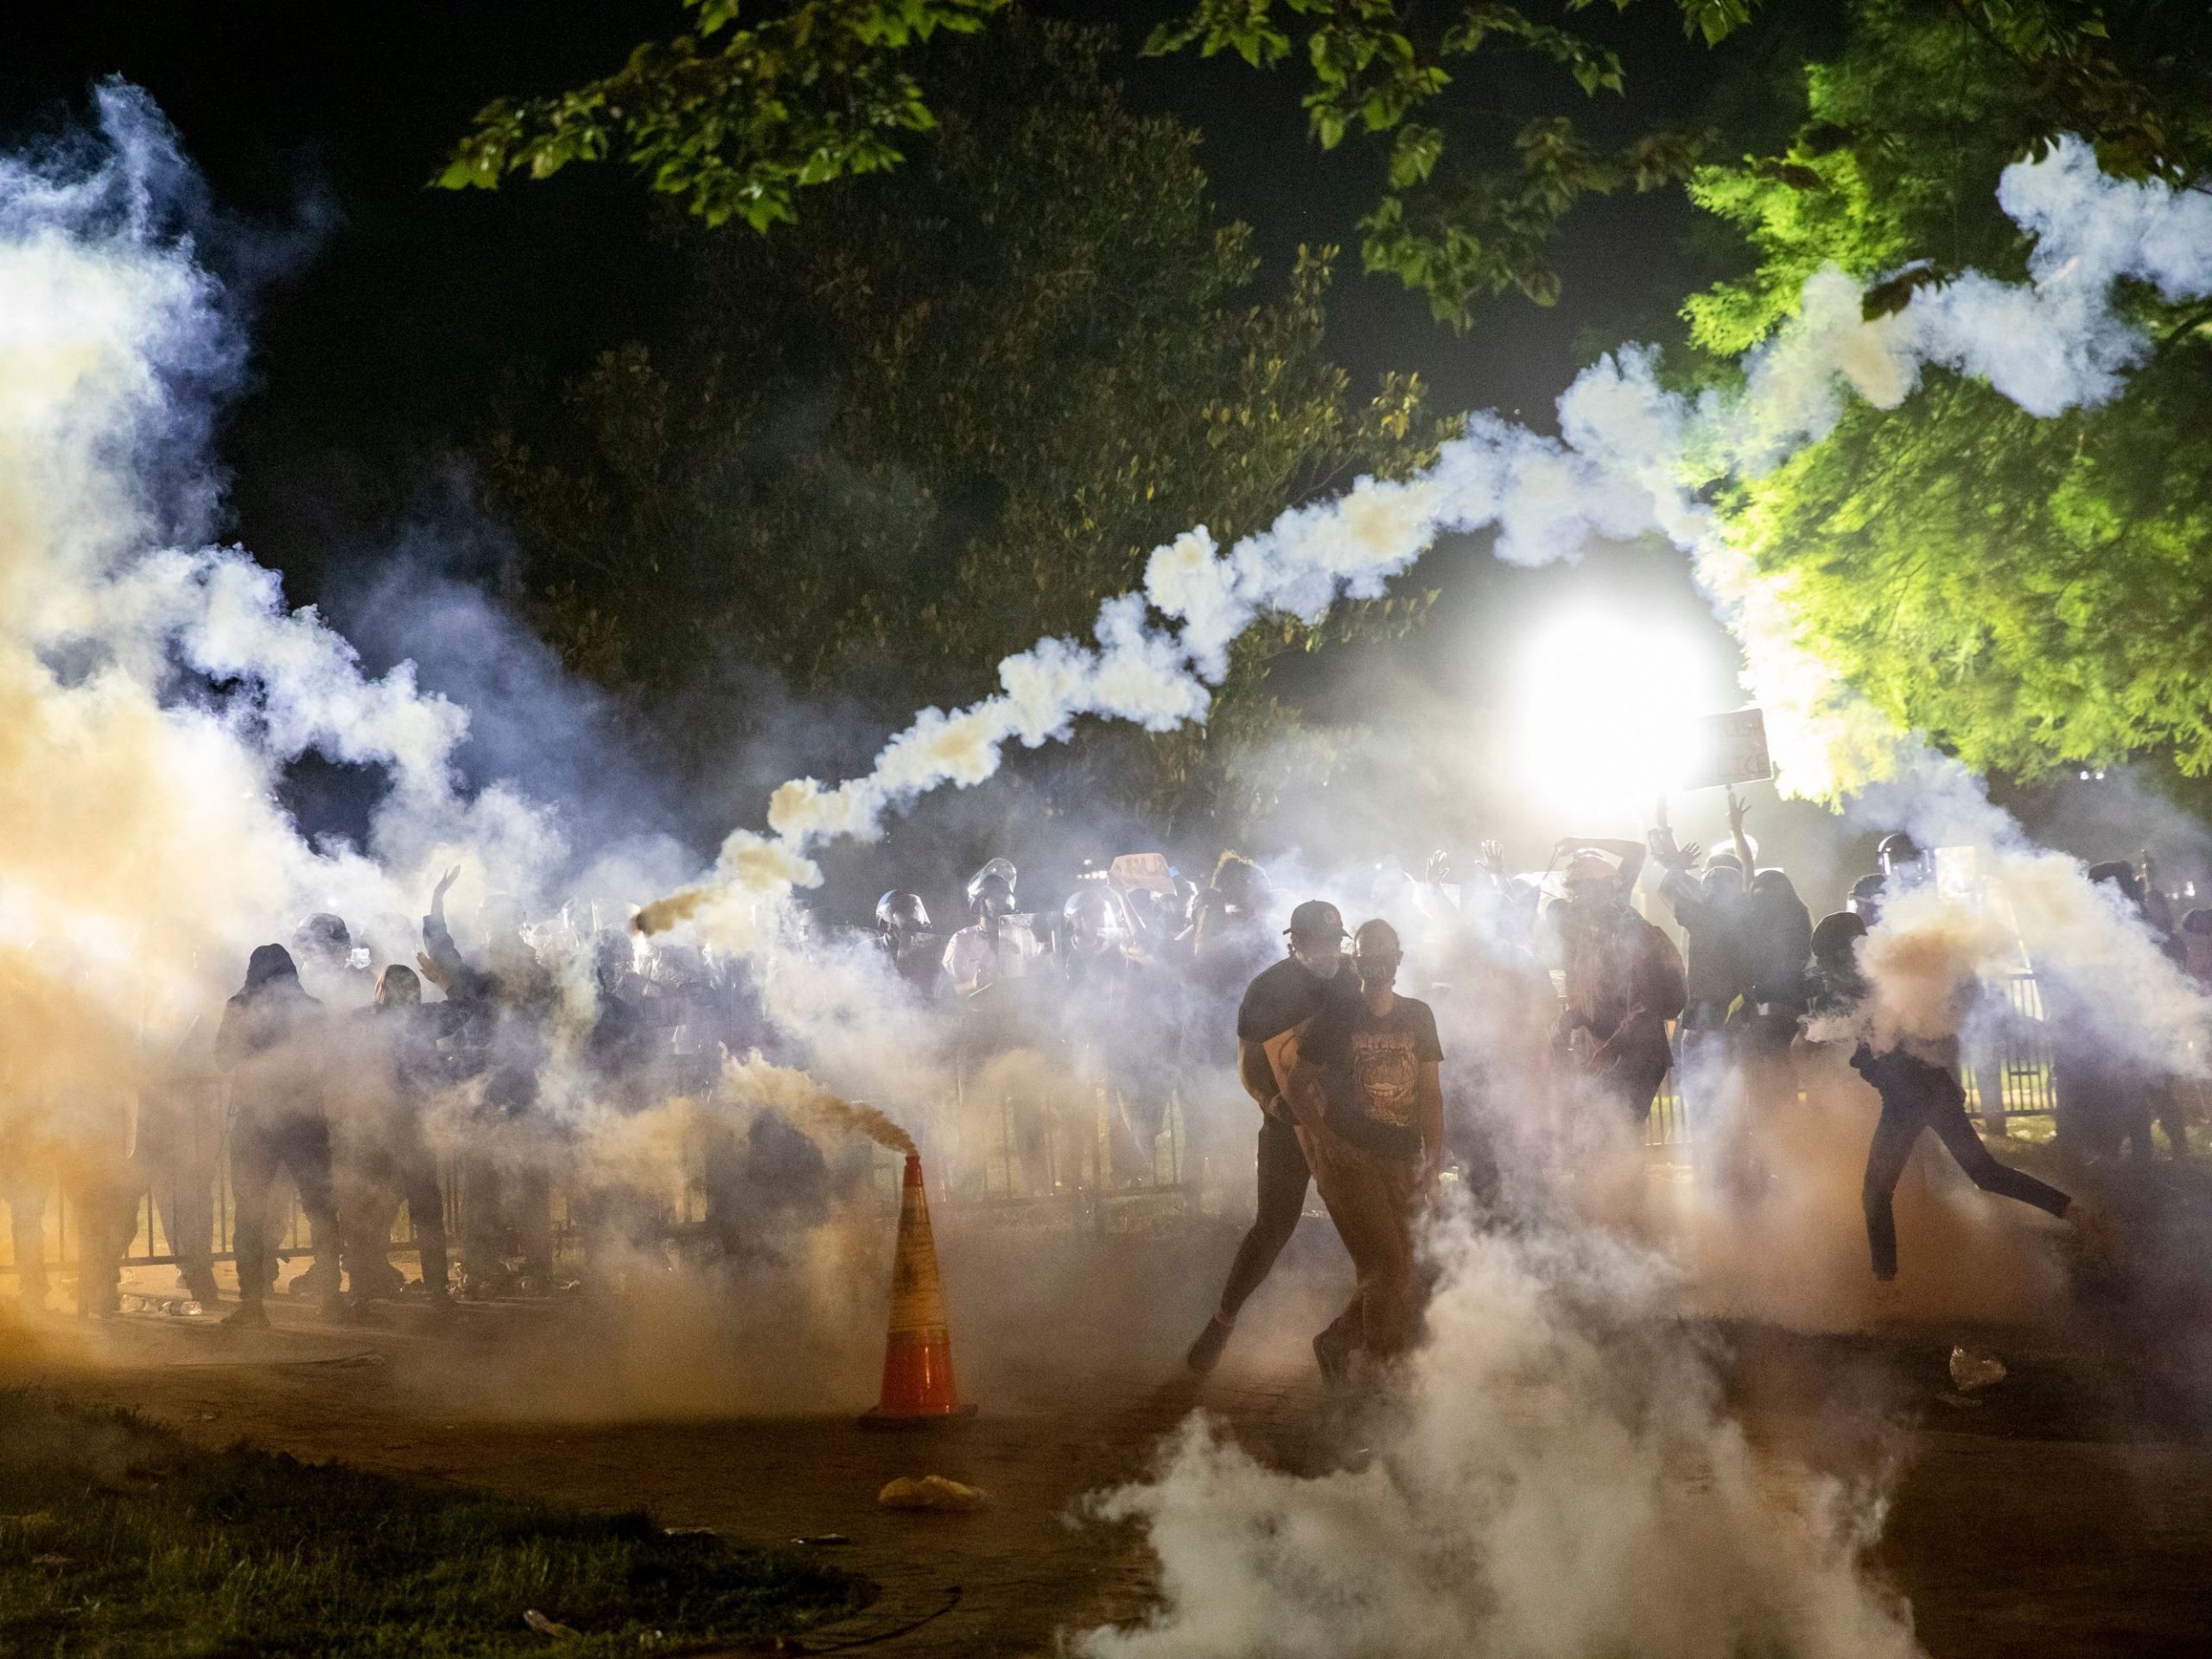 Tear gas rises as protesters face off with police during a demonstration on May 31 outside the White House over the death of George Floyd at the hands of Minneapolis Police.